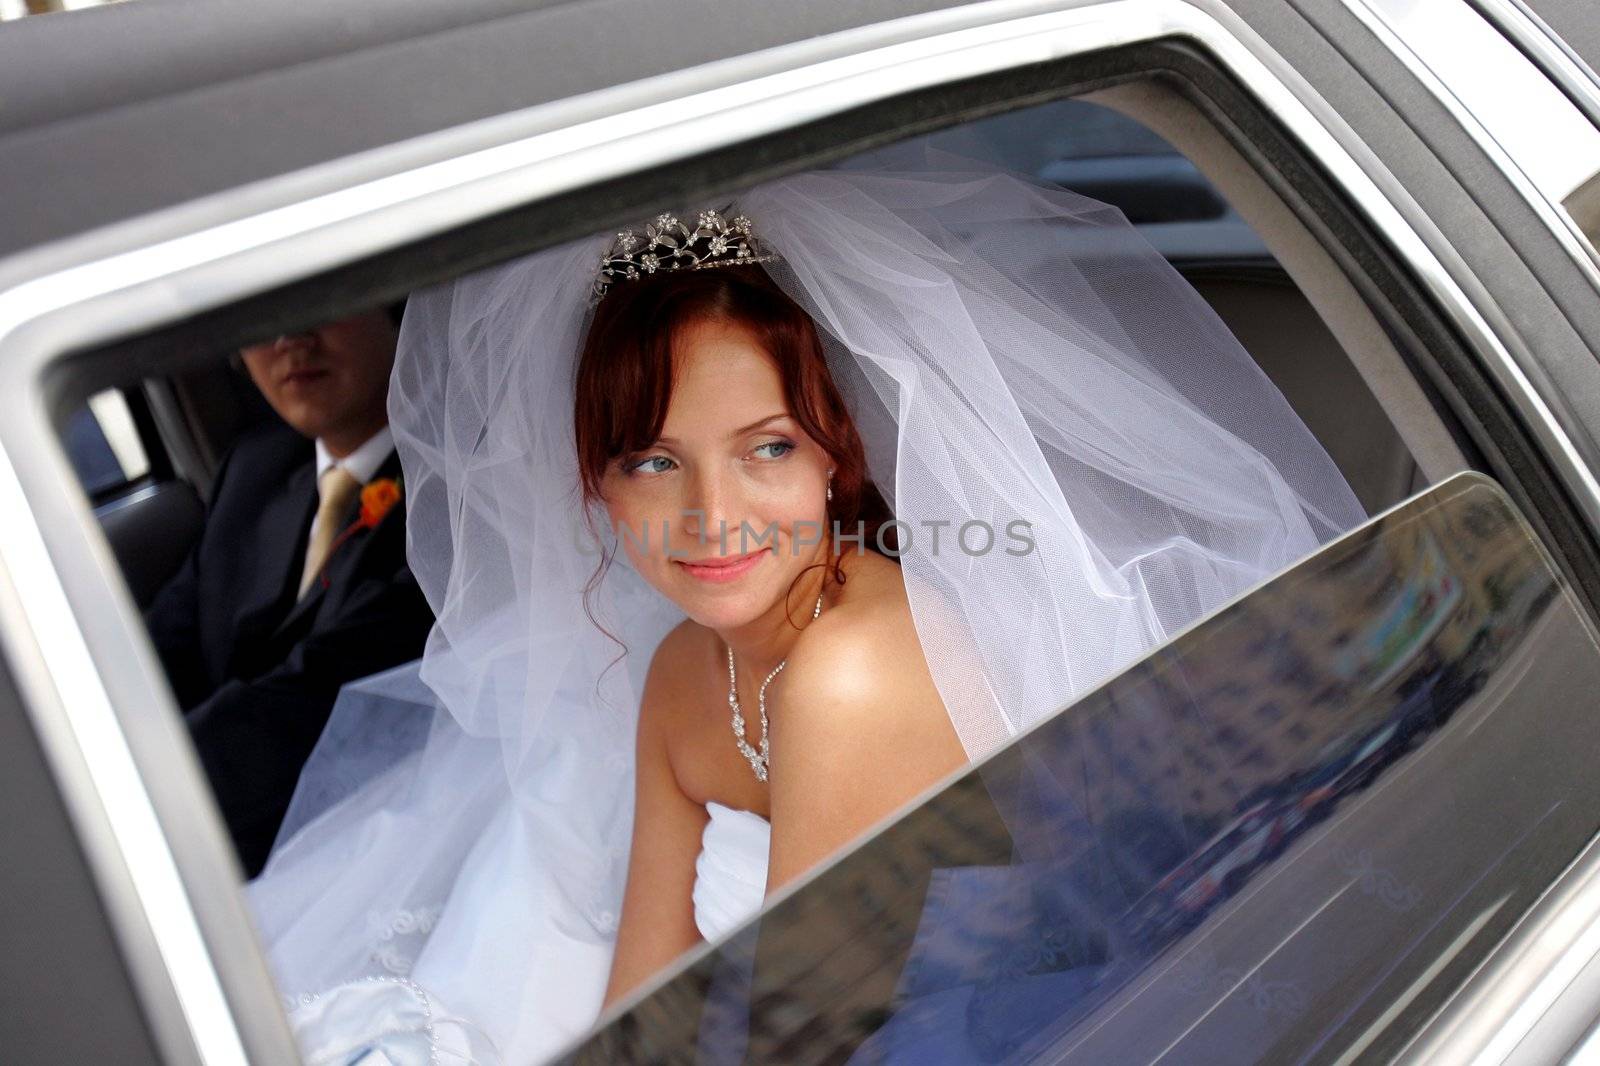 Smiling bride with groom in wedding car limousine.